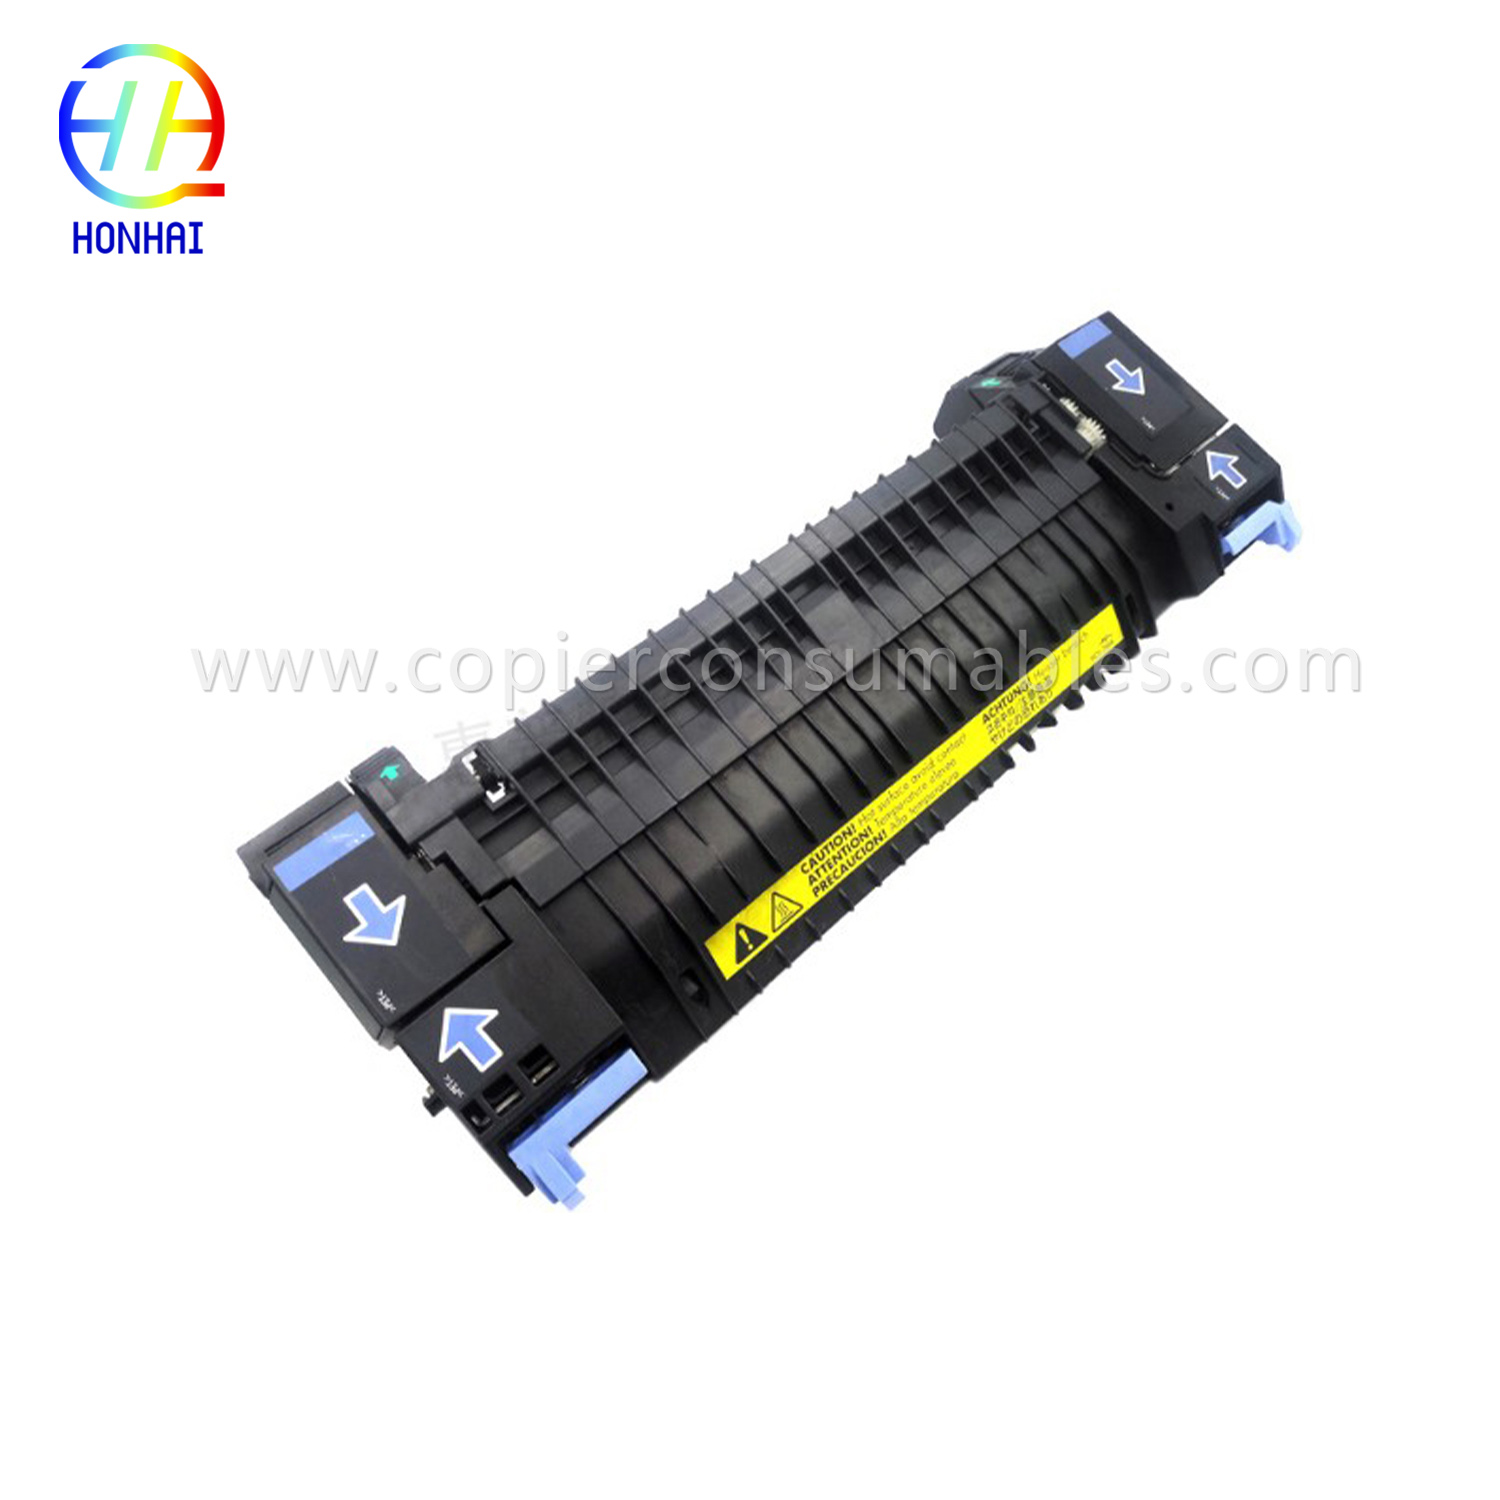 Fuser Assembly for HP Color LaserJet 2700 3000 3600 3800 CP3505 (RM1-4348 RM1-2763 RM1-2665) 拷贝